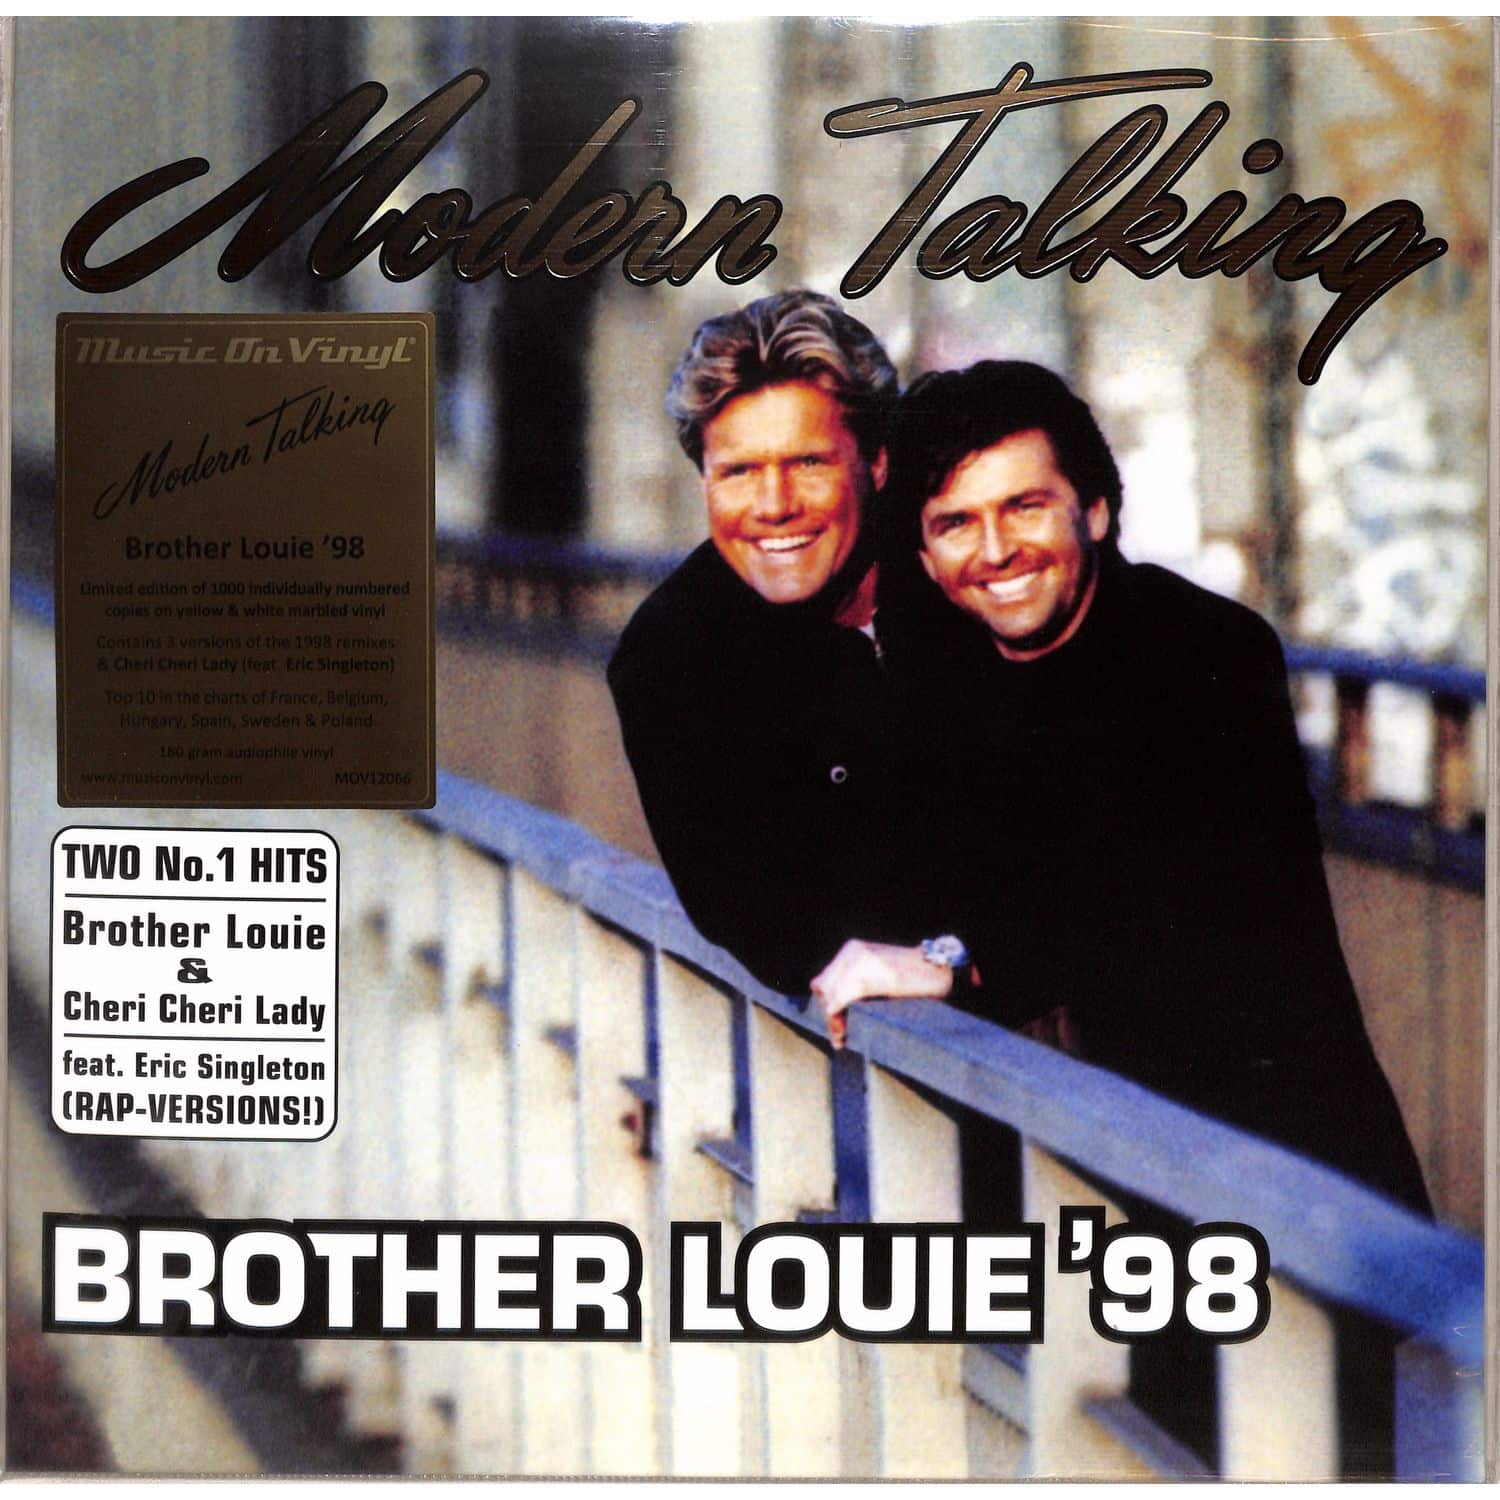 Modern Talking - BROTHER LOUIE 98